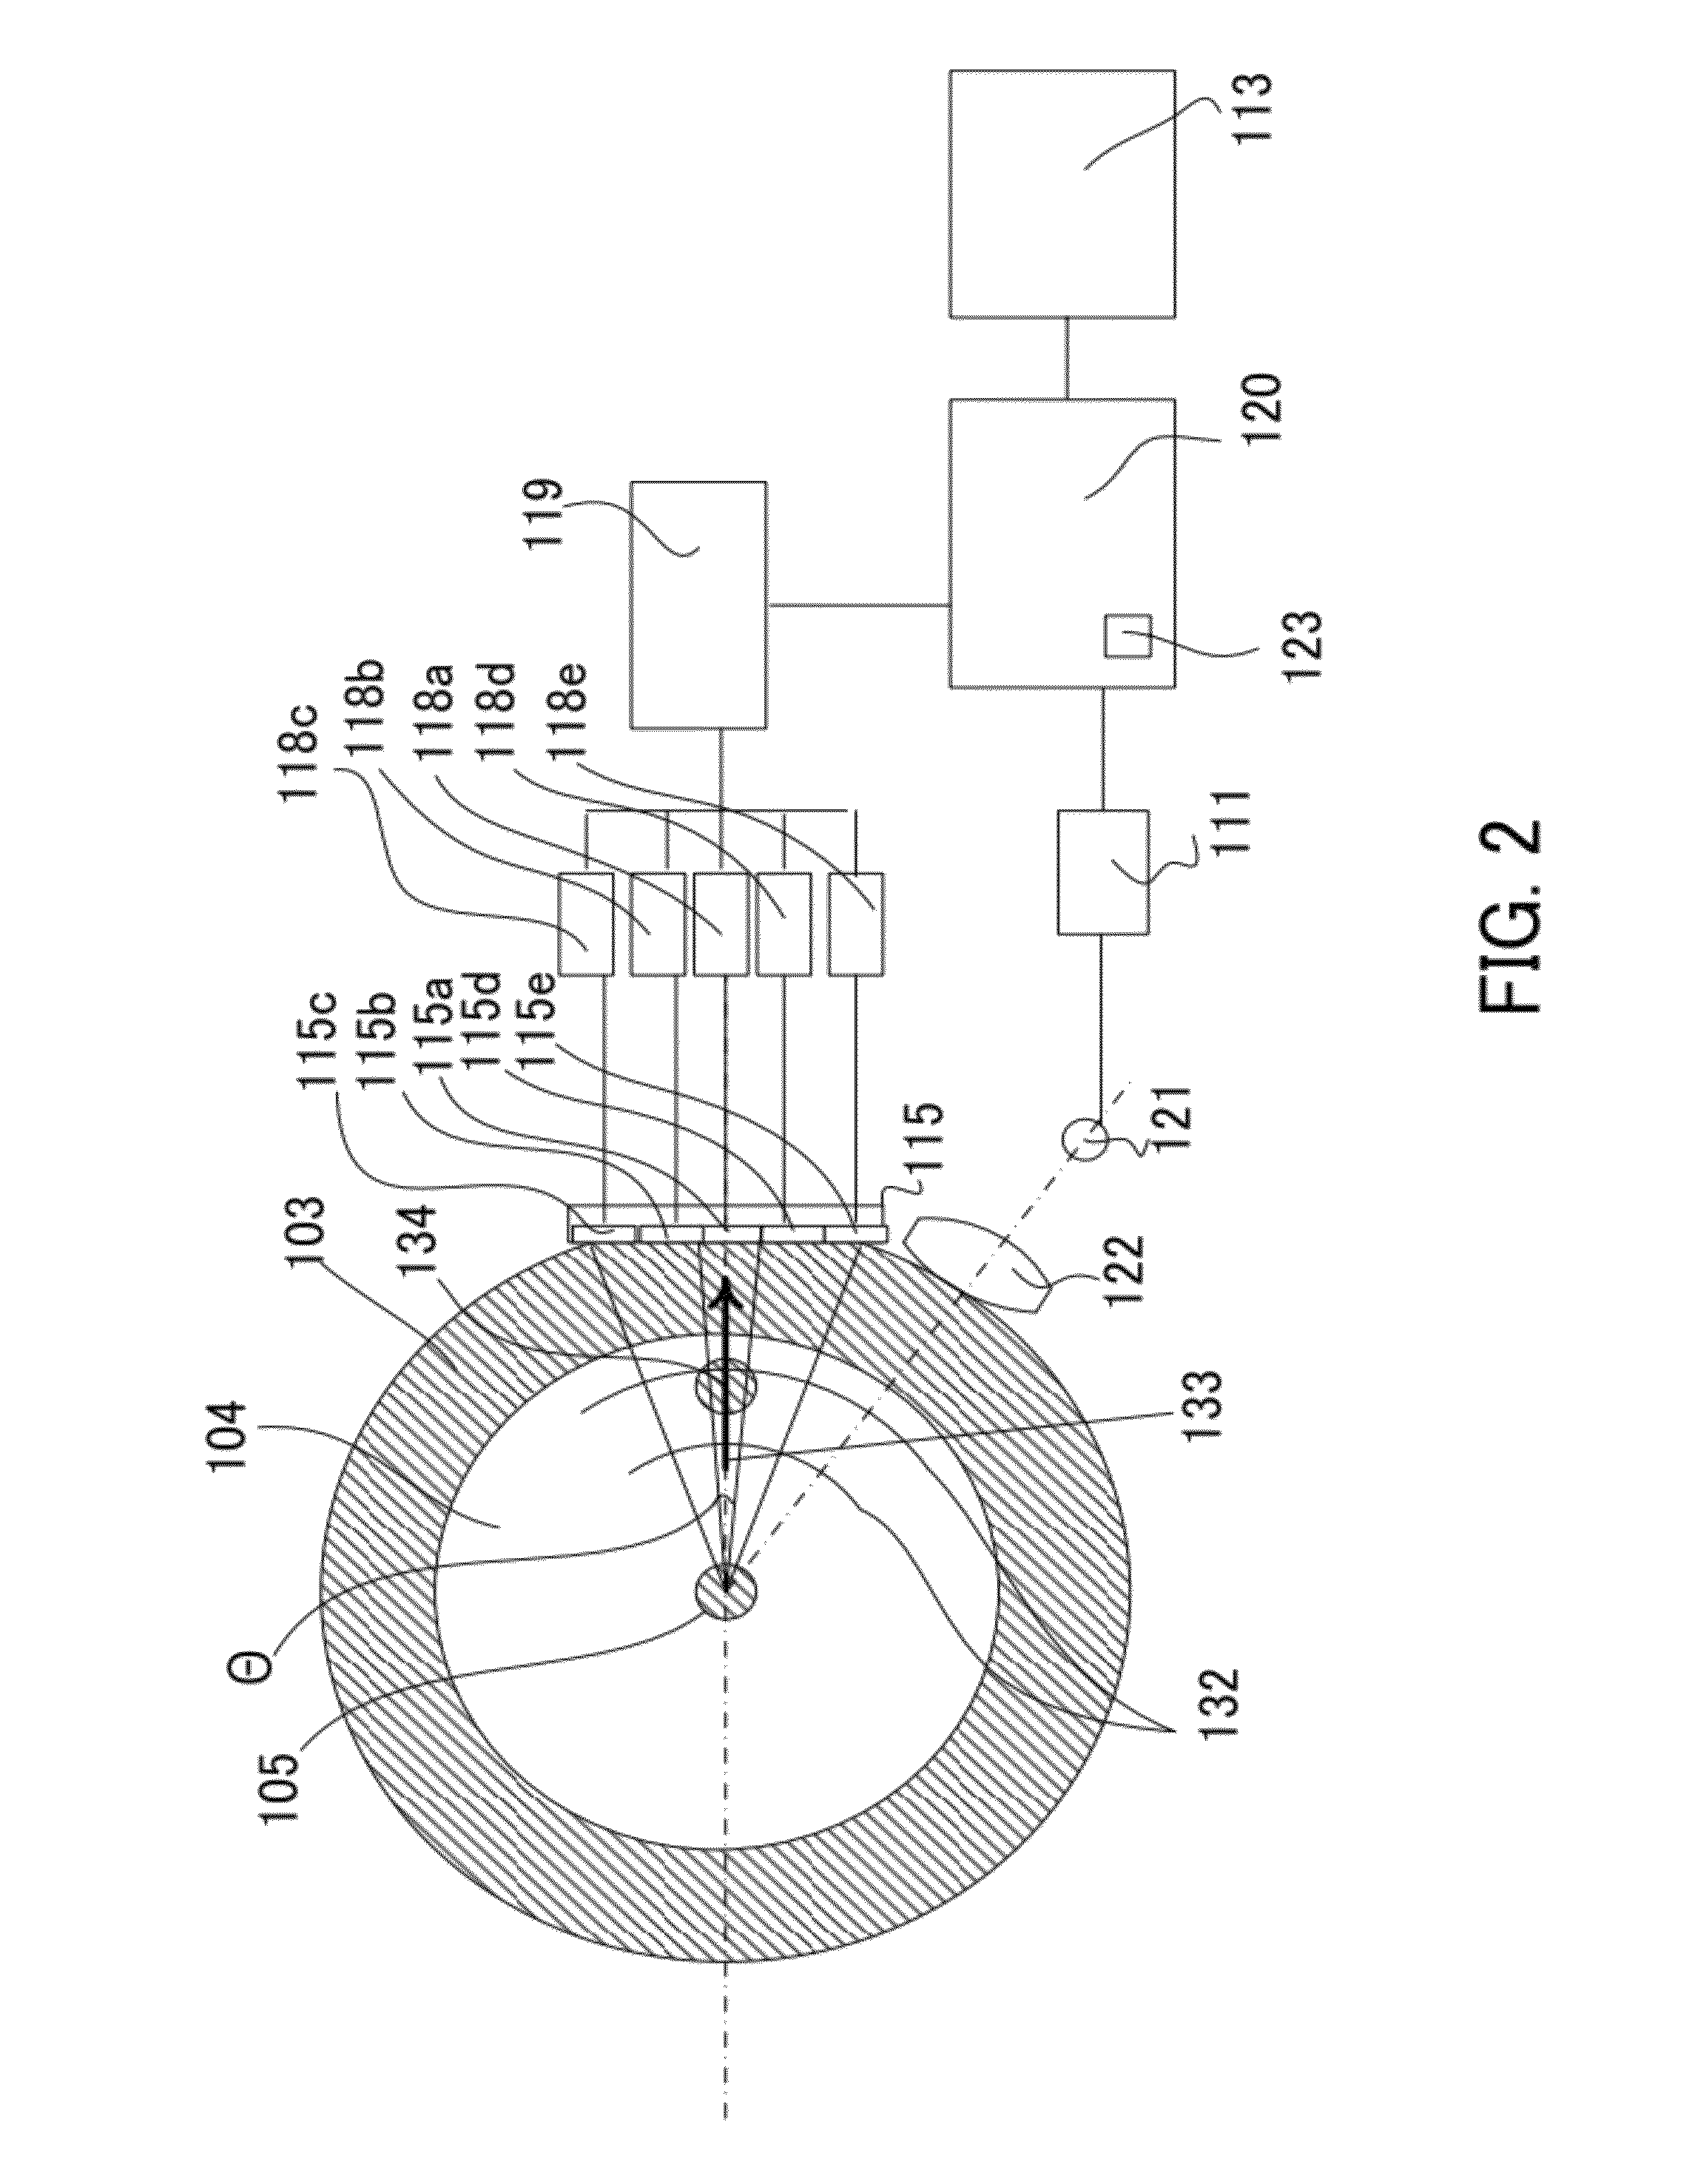 Photoacoustic apparatus